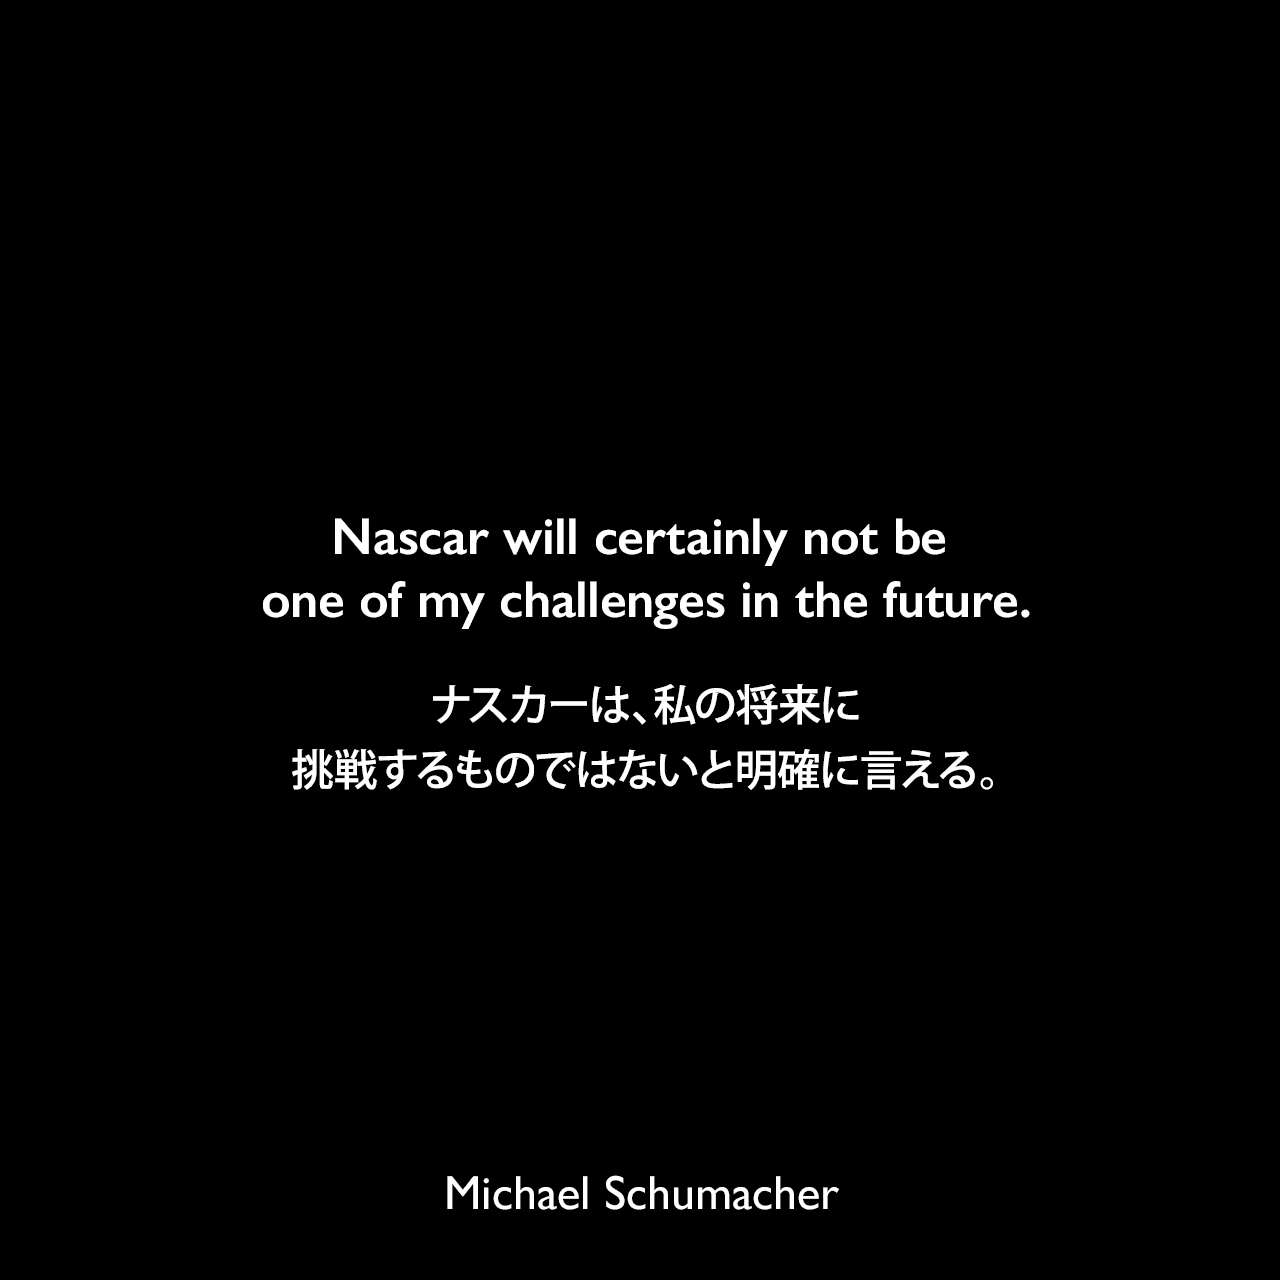 Nascar will certainly not be one of my challenges in the future.ナスカーは、私の将来に挑戦するものではないと明確に言える。Michael Schumacher